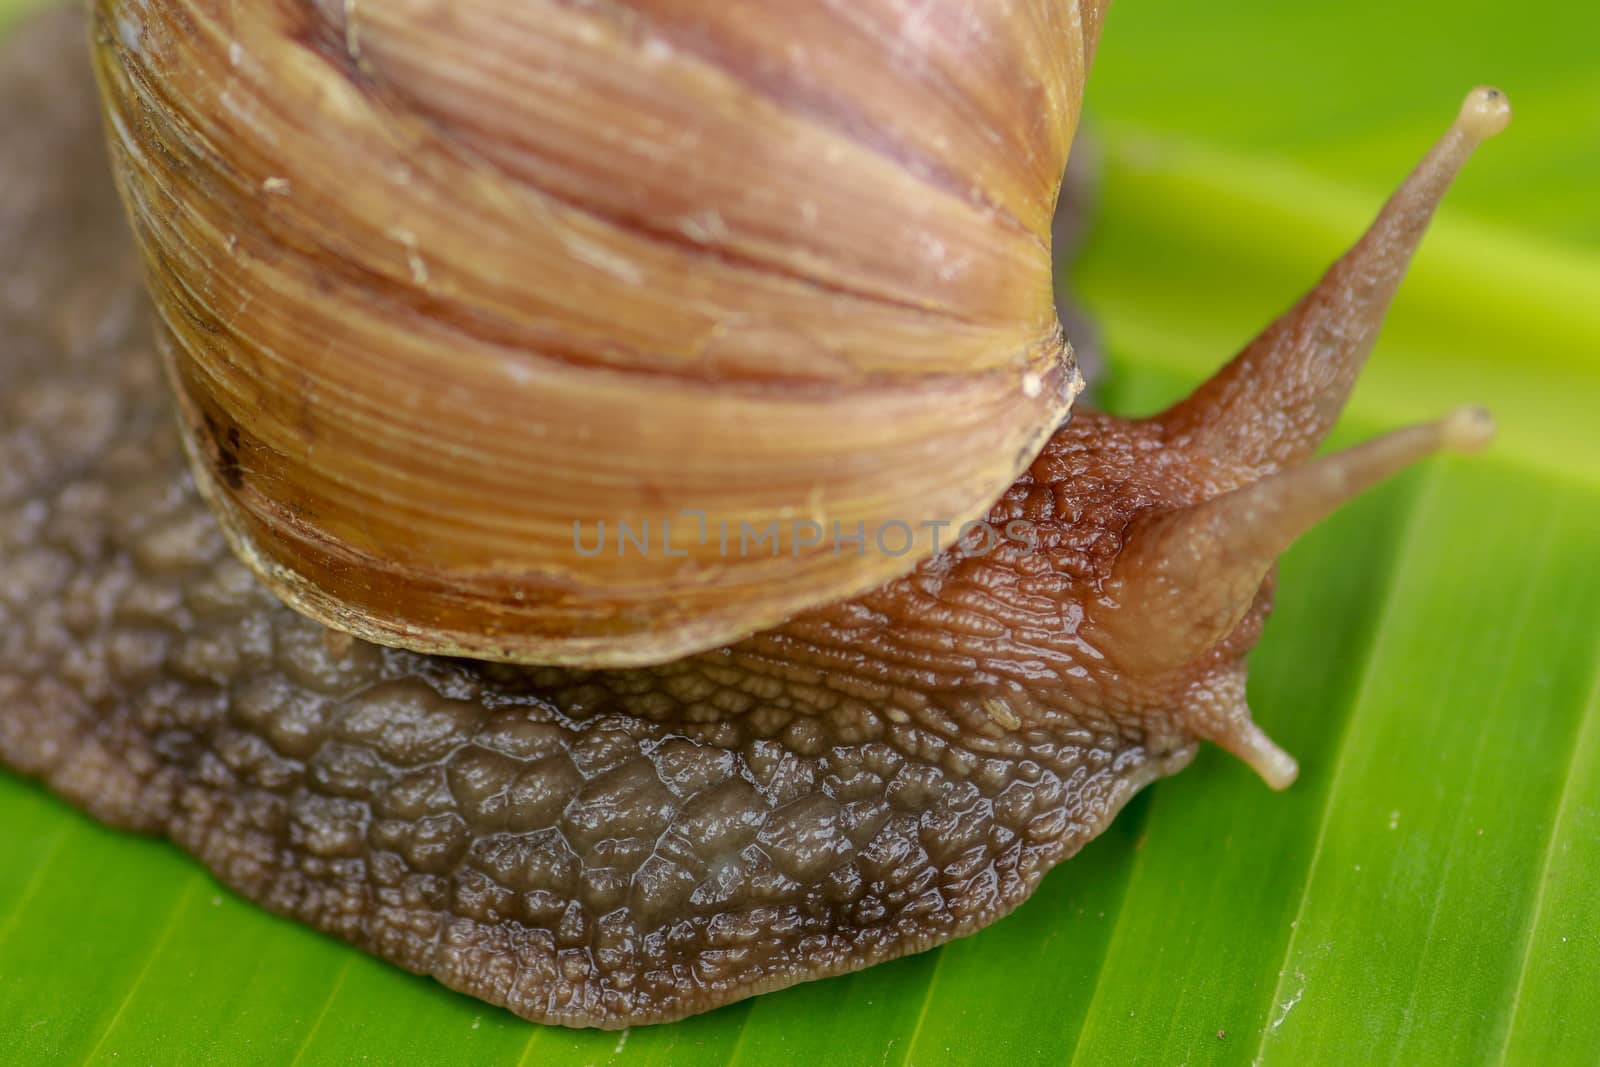 A large brown snail, Giant African snail, Achatina fulica, Lissachatina fulica, creeps on the green wet leaf. Horns are visible, close-up by Sanatana2008